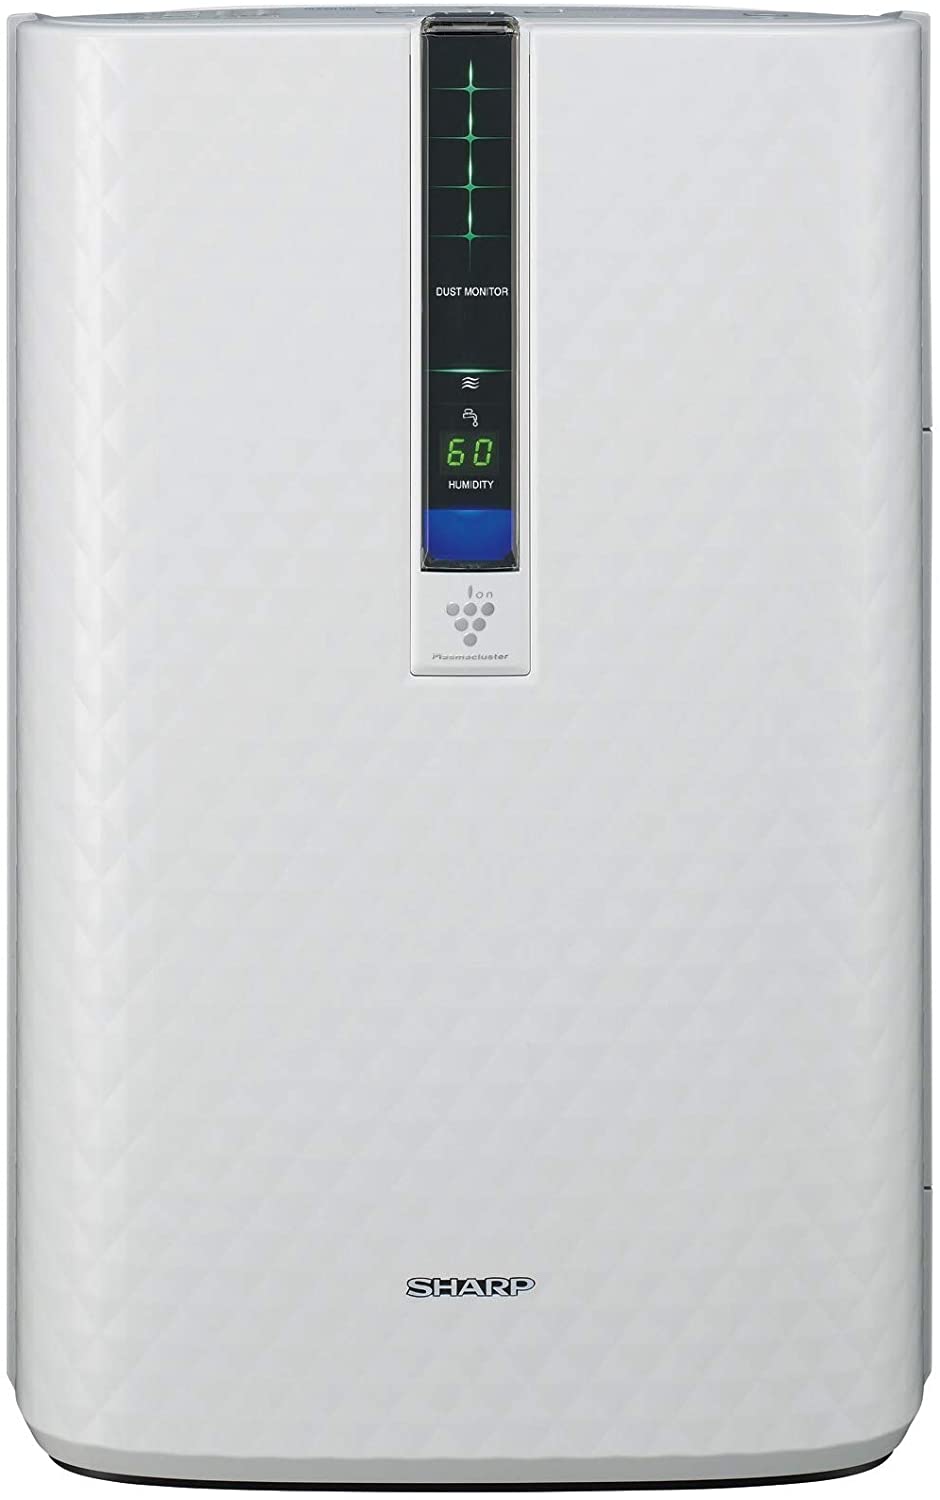 Sharp Triple Action Plasmacluster Air Purifier with Humidifying Function (254 sq. ft.), KC-850U